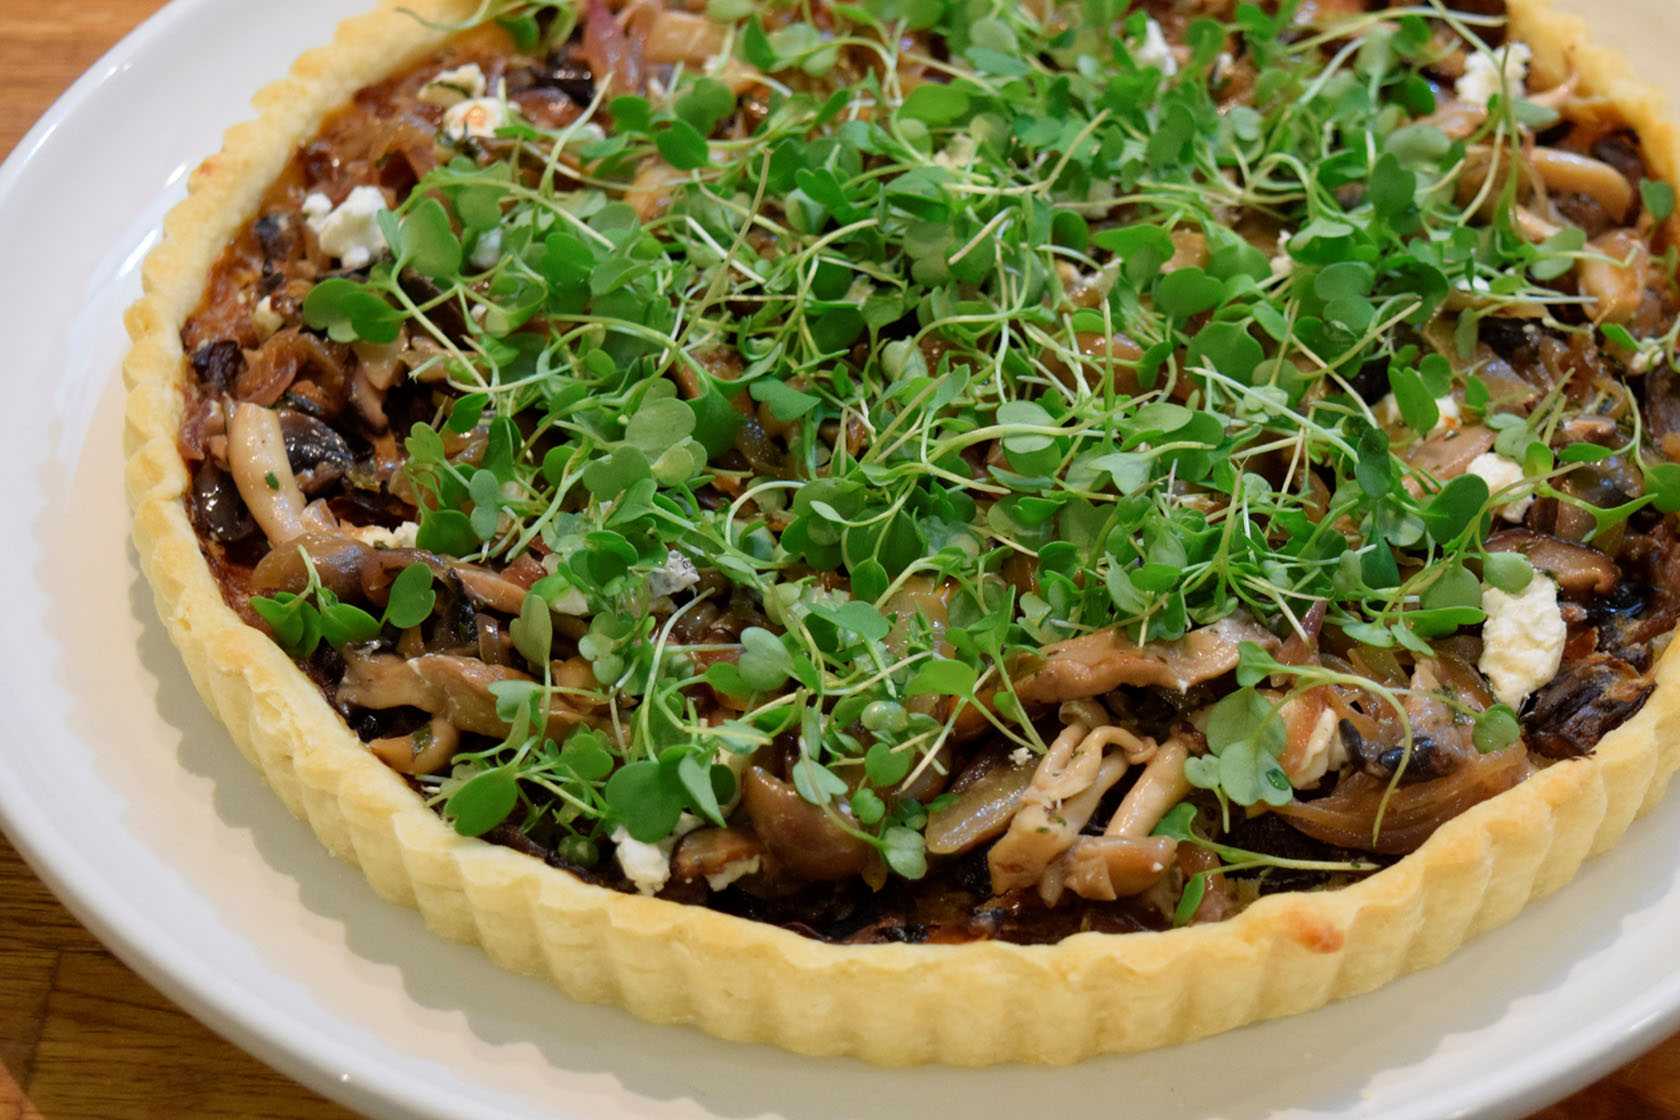 Mushroom and goat cheese torte topped with arugula